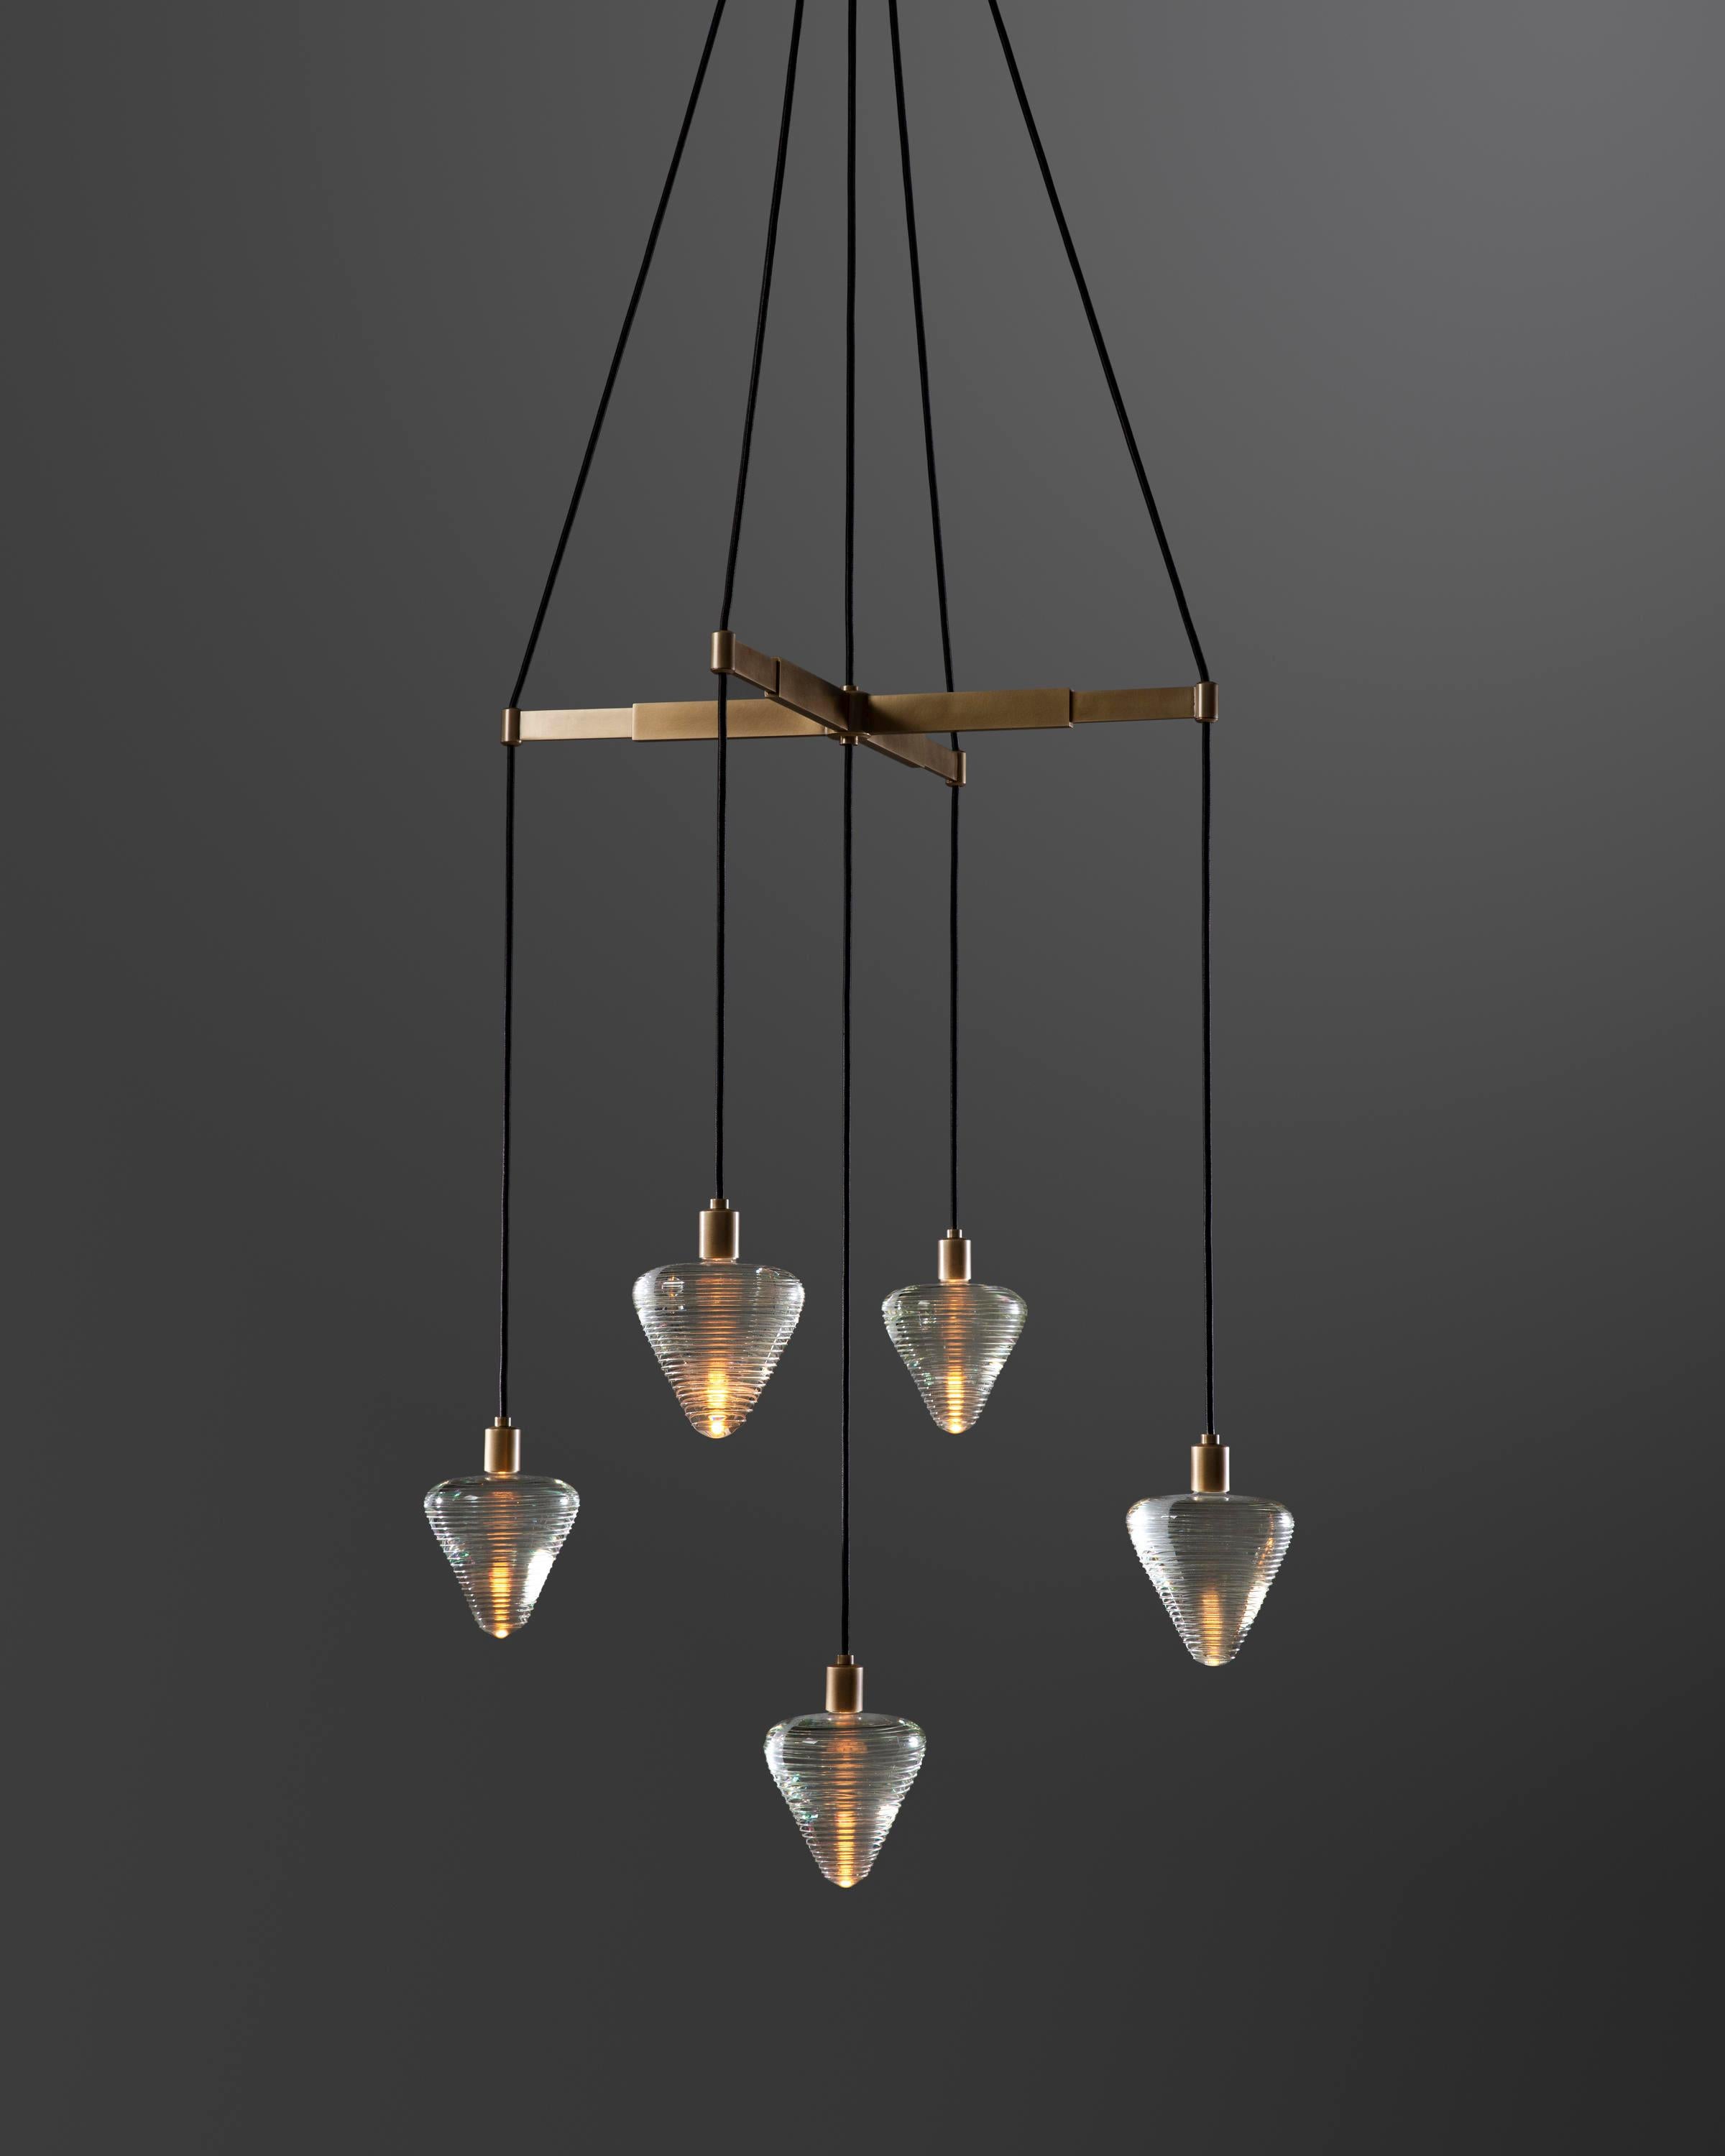 Galileo’s study of the pendulum – which ultimately led to the understanding of how to mark time – inspires the Pendulum Chandelier. The combination here of solid crystal that has banding applied to the outside with the light makes it feels virtually